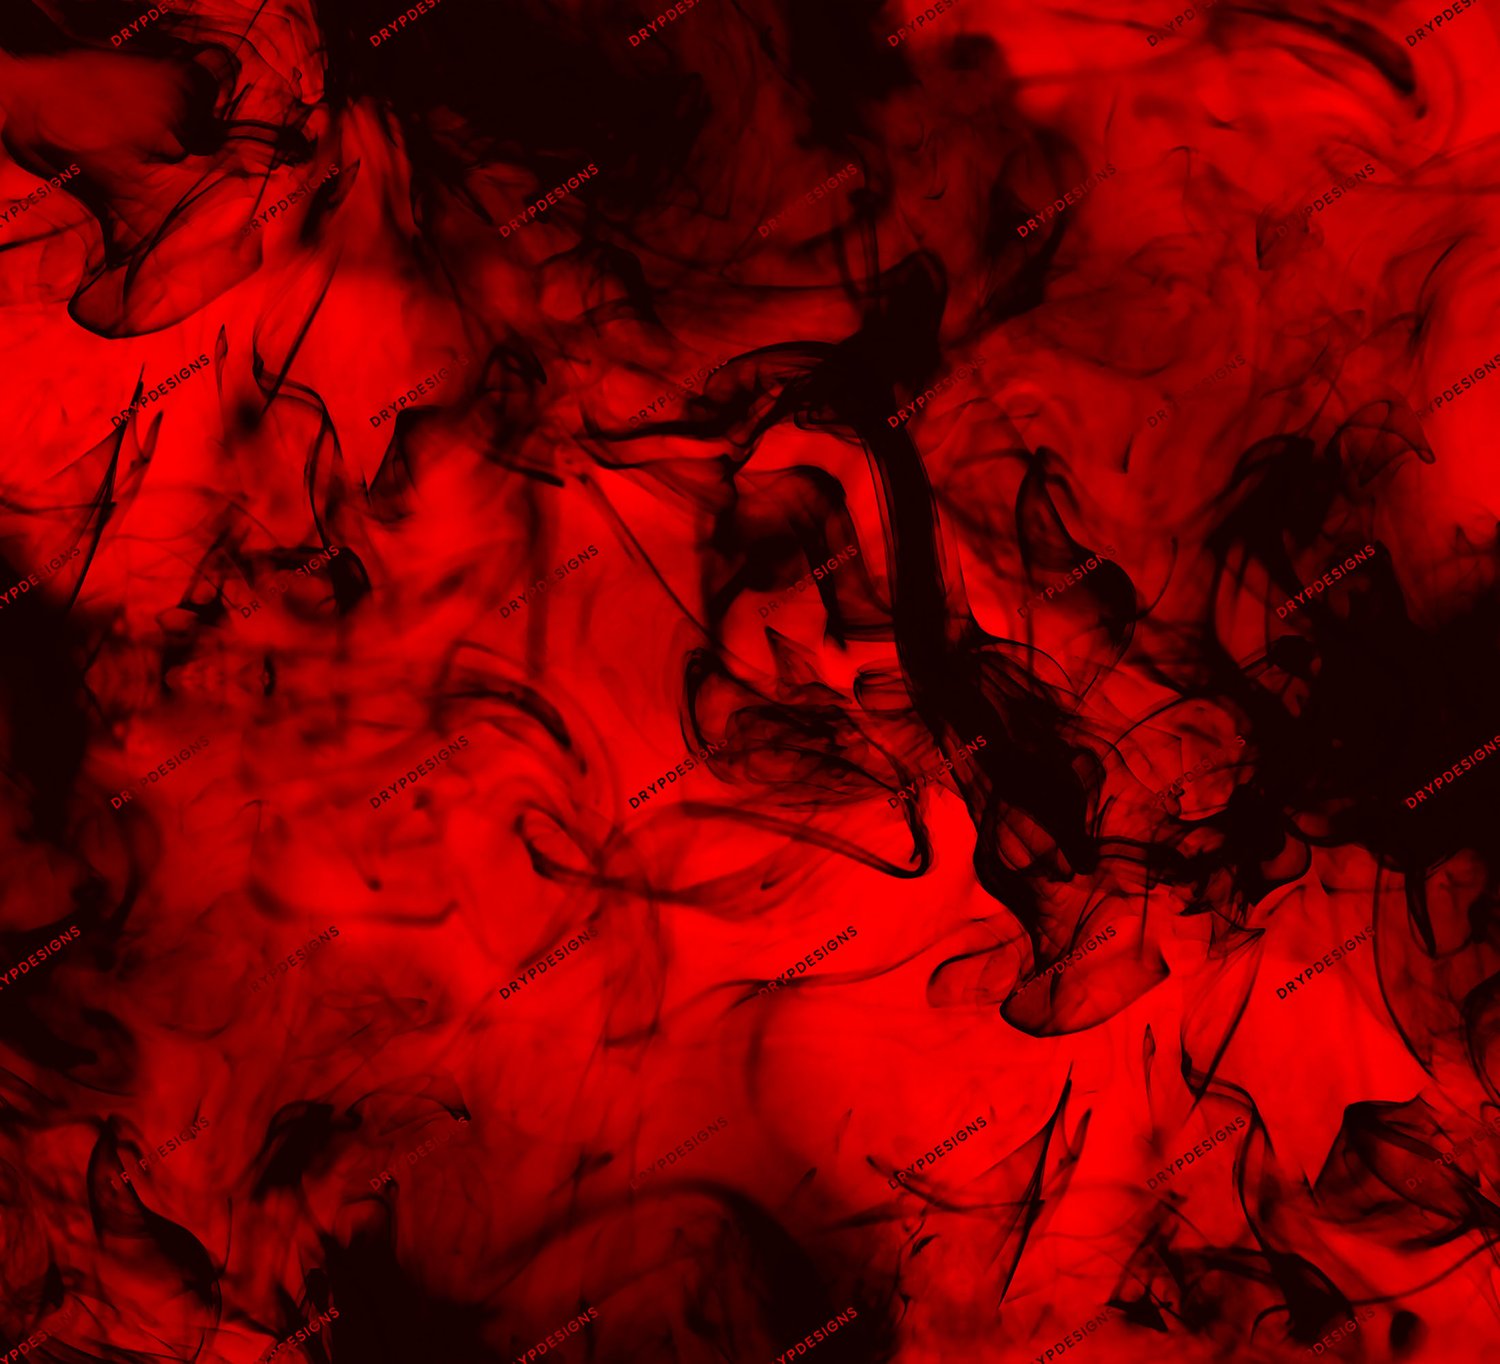 Red + Smoke Digital Background Texture drypdesigns